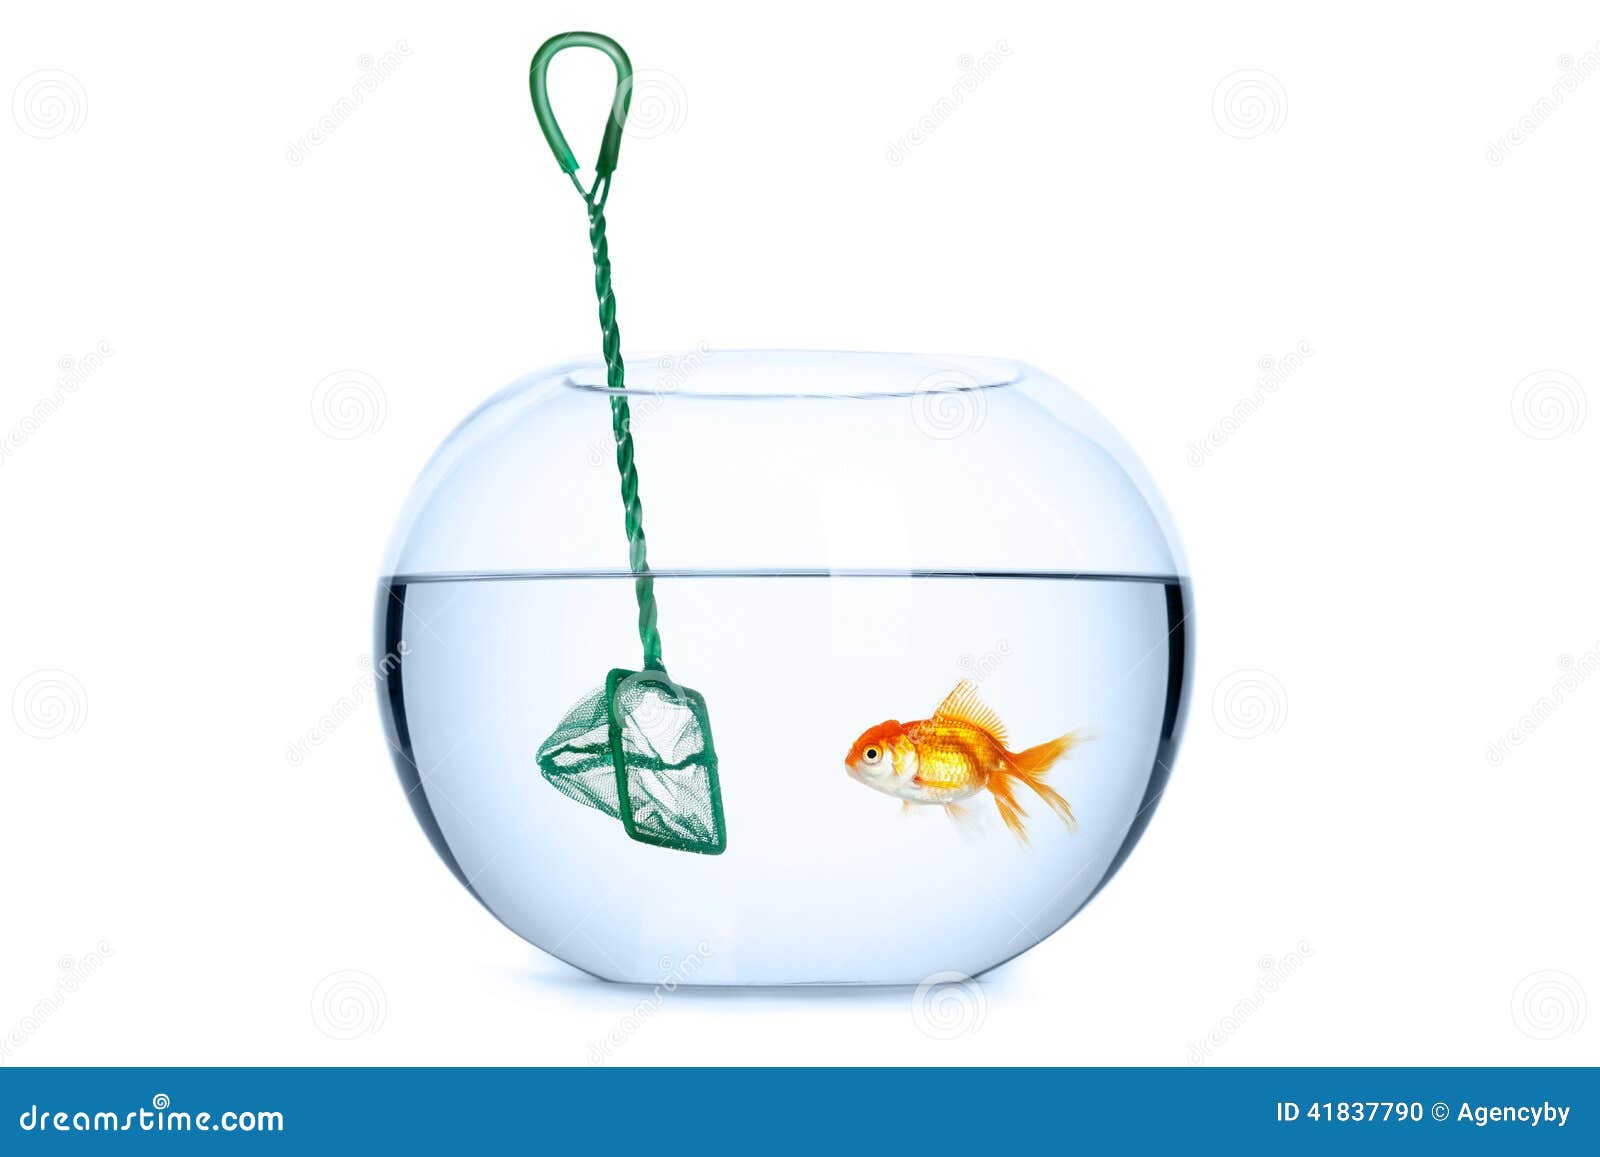 Goldfish in front of a net stock photo. Image of fishbowl - 41837790